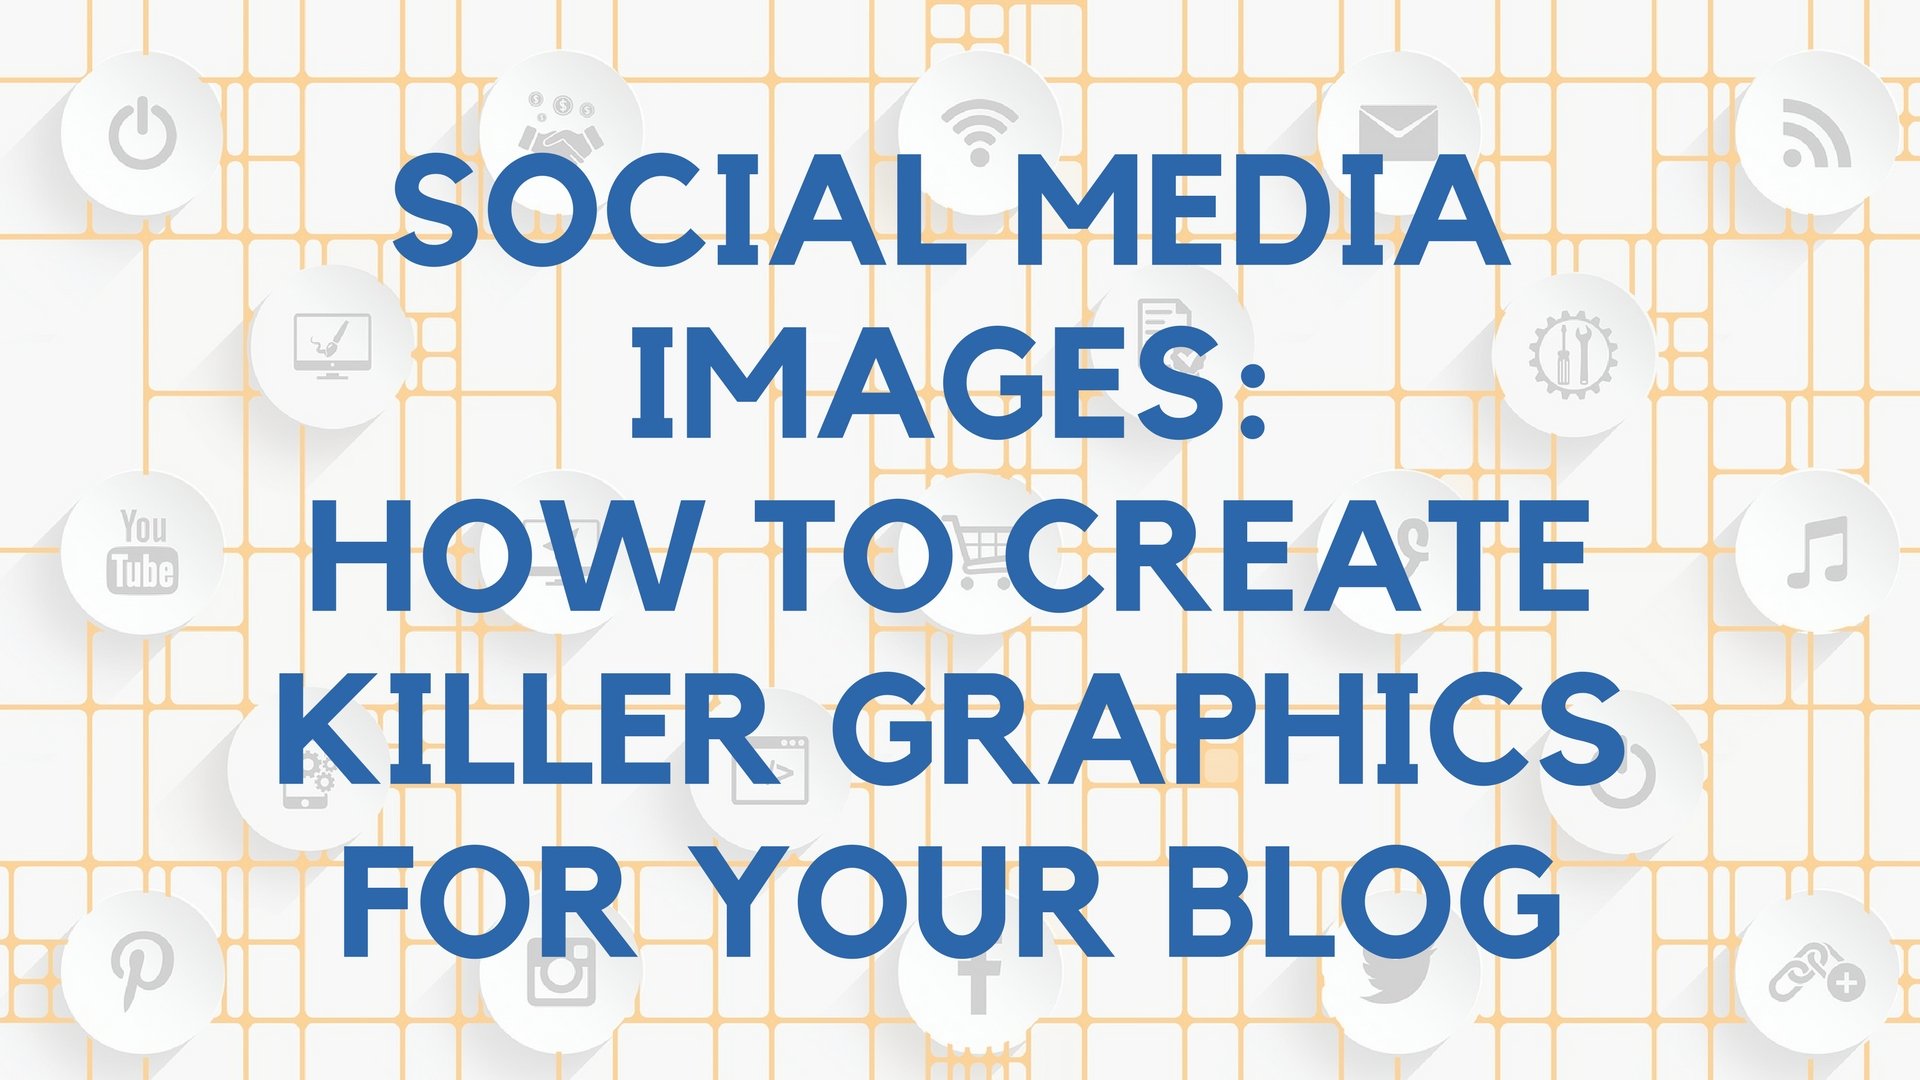 Social Media Images: How to Create Killer Graphics for Your Blog